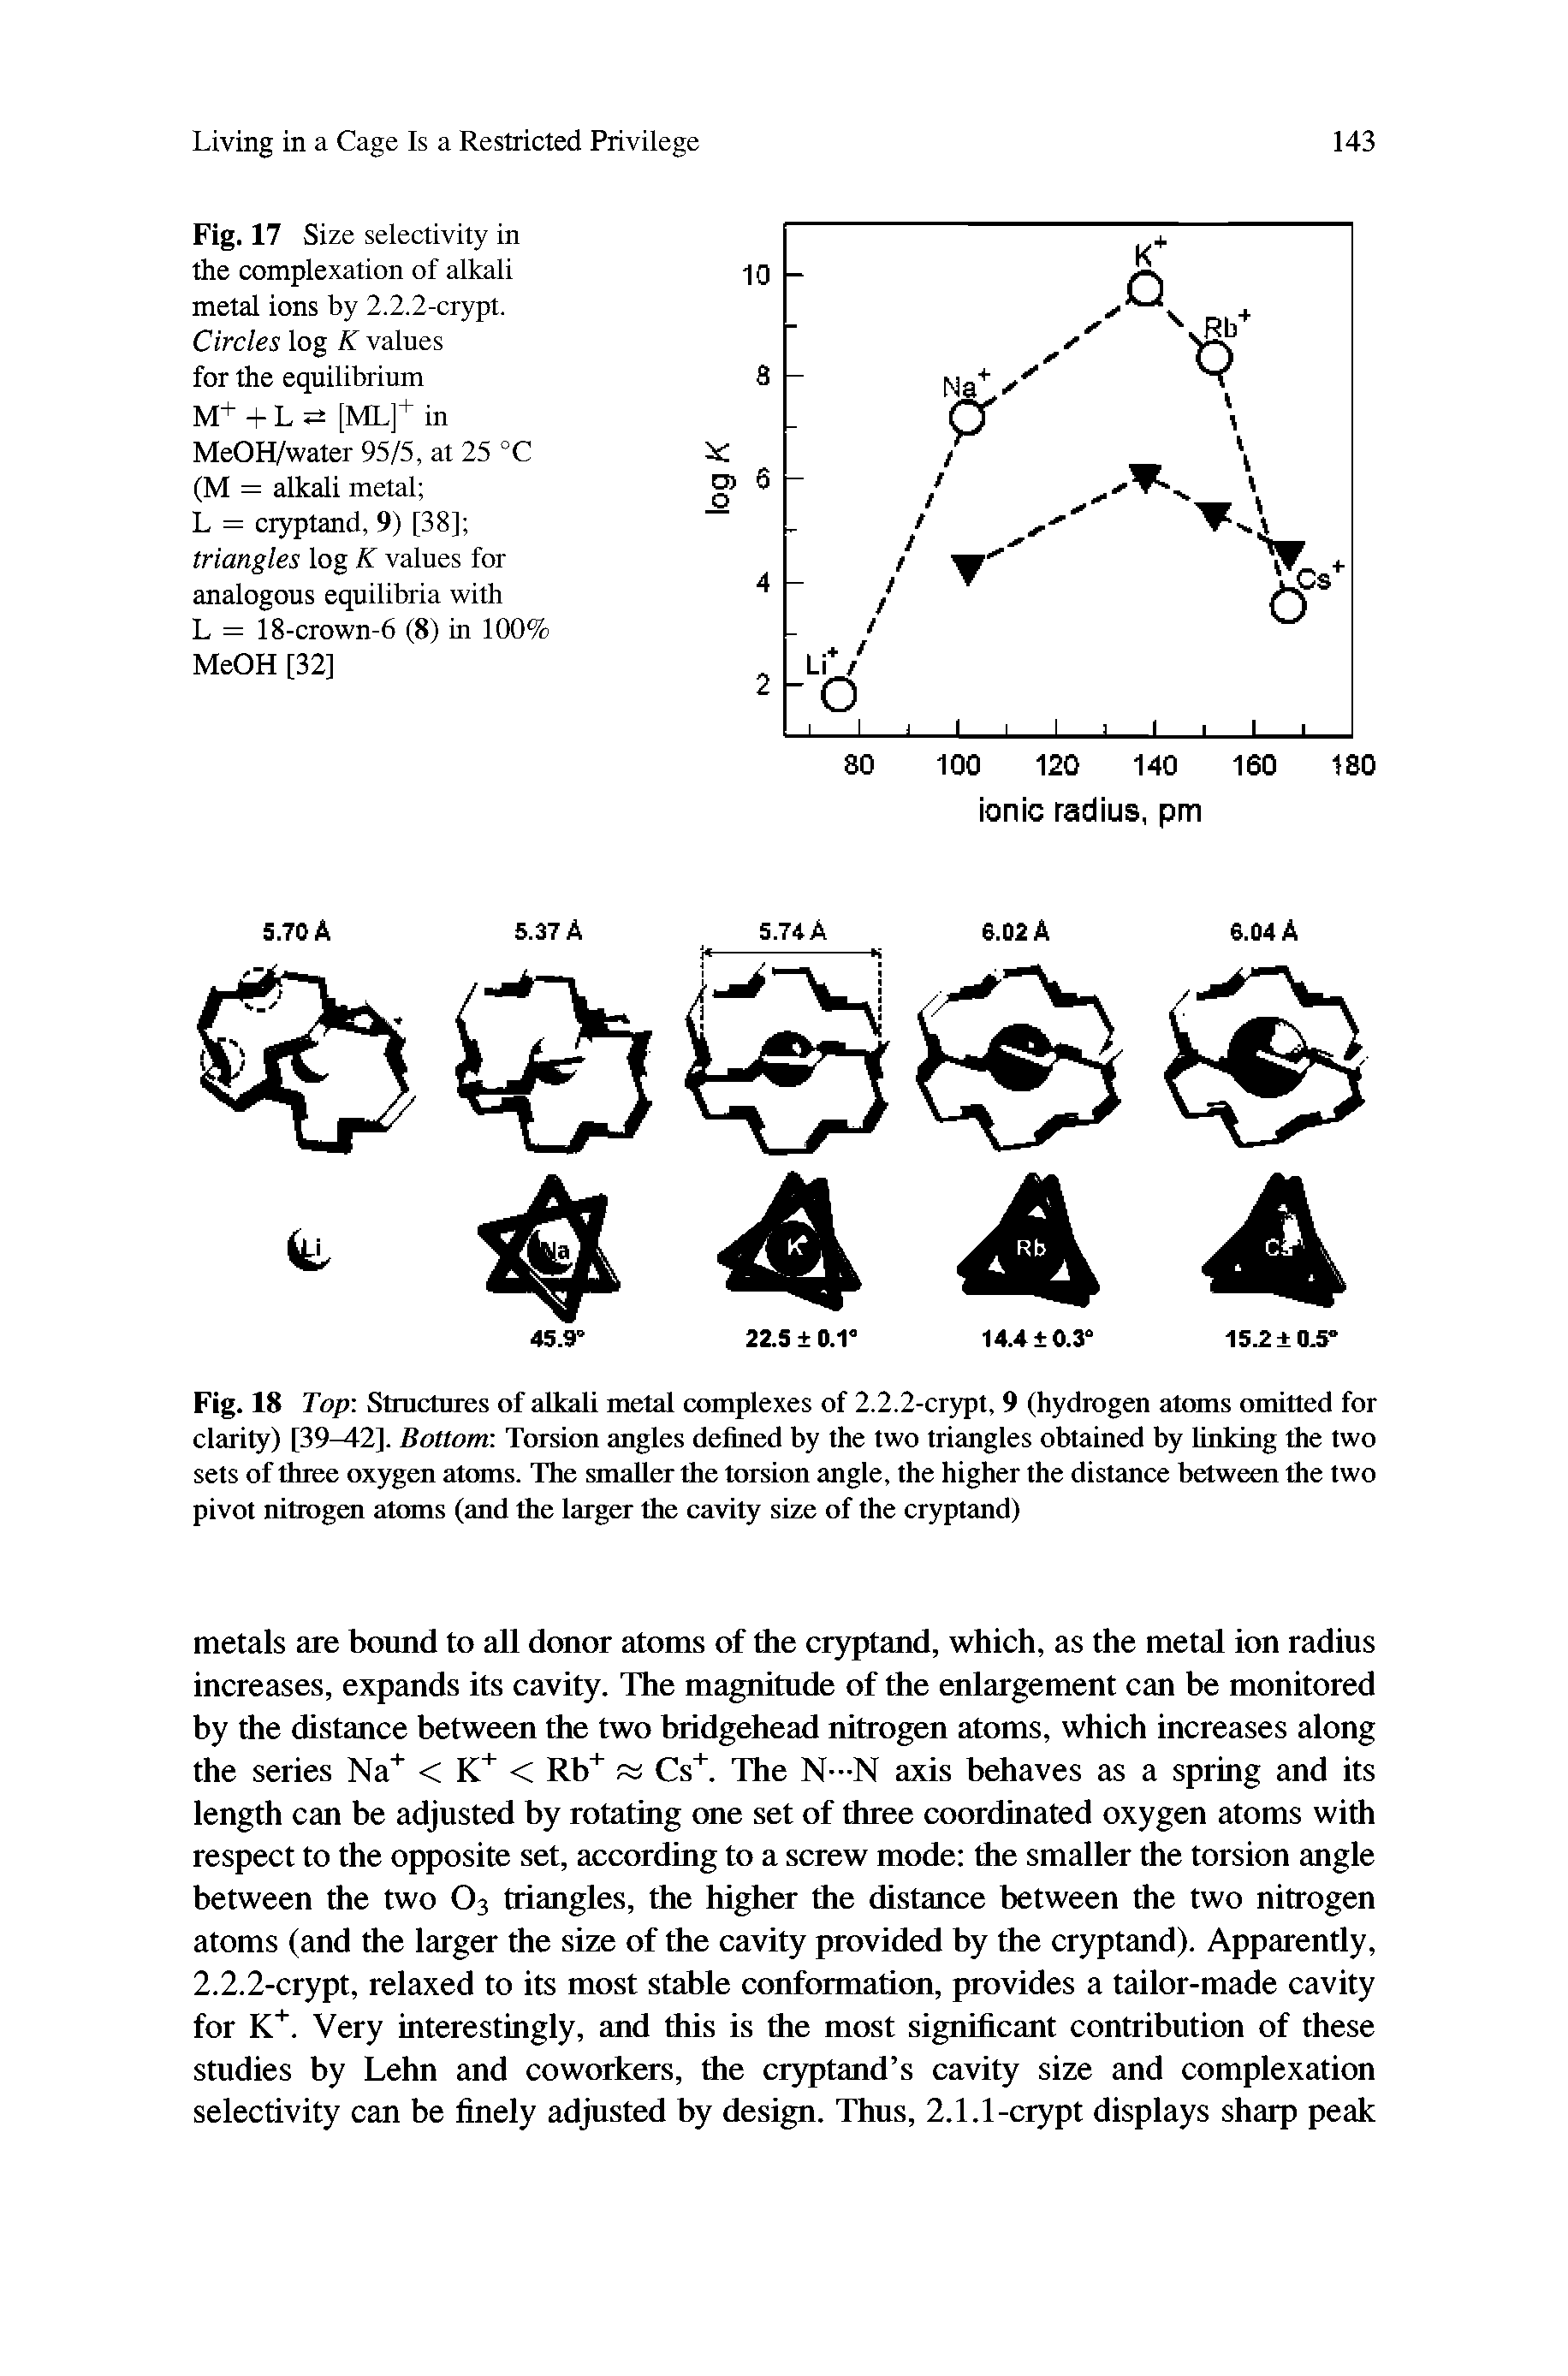 Fig. 18 Top-. Structures of alkali metal complexes of 2.2.2-crypt, 9 (hydrogen atoms omitted for clarity) 139—42. Bottom Torsion angles defined by the two triangles obtained by linking the two sets of three oxygen atoms. The smaller the torsion angle, the higher the distance between the two pivot nitrogen atoms (and the larger the cavity size of the cryptand)...